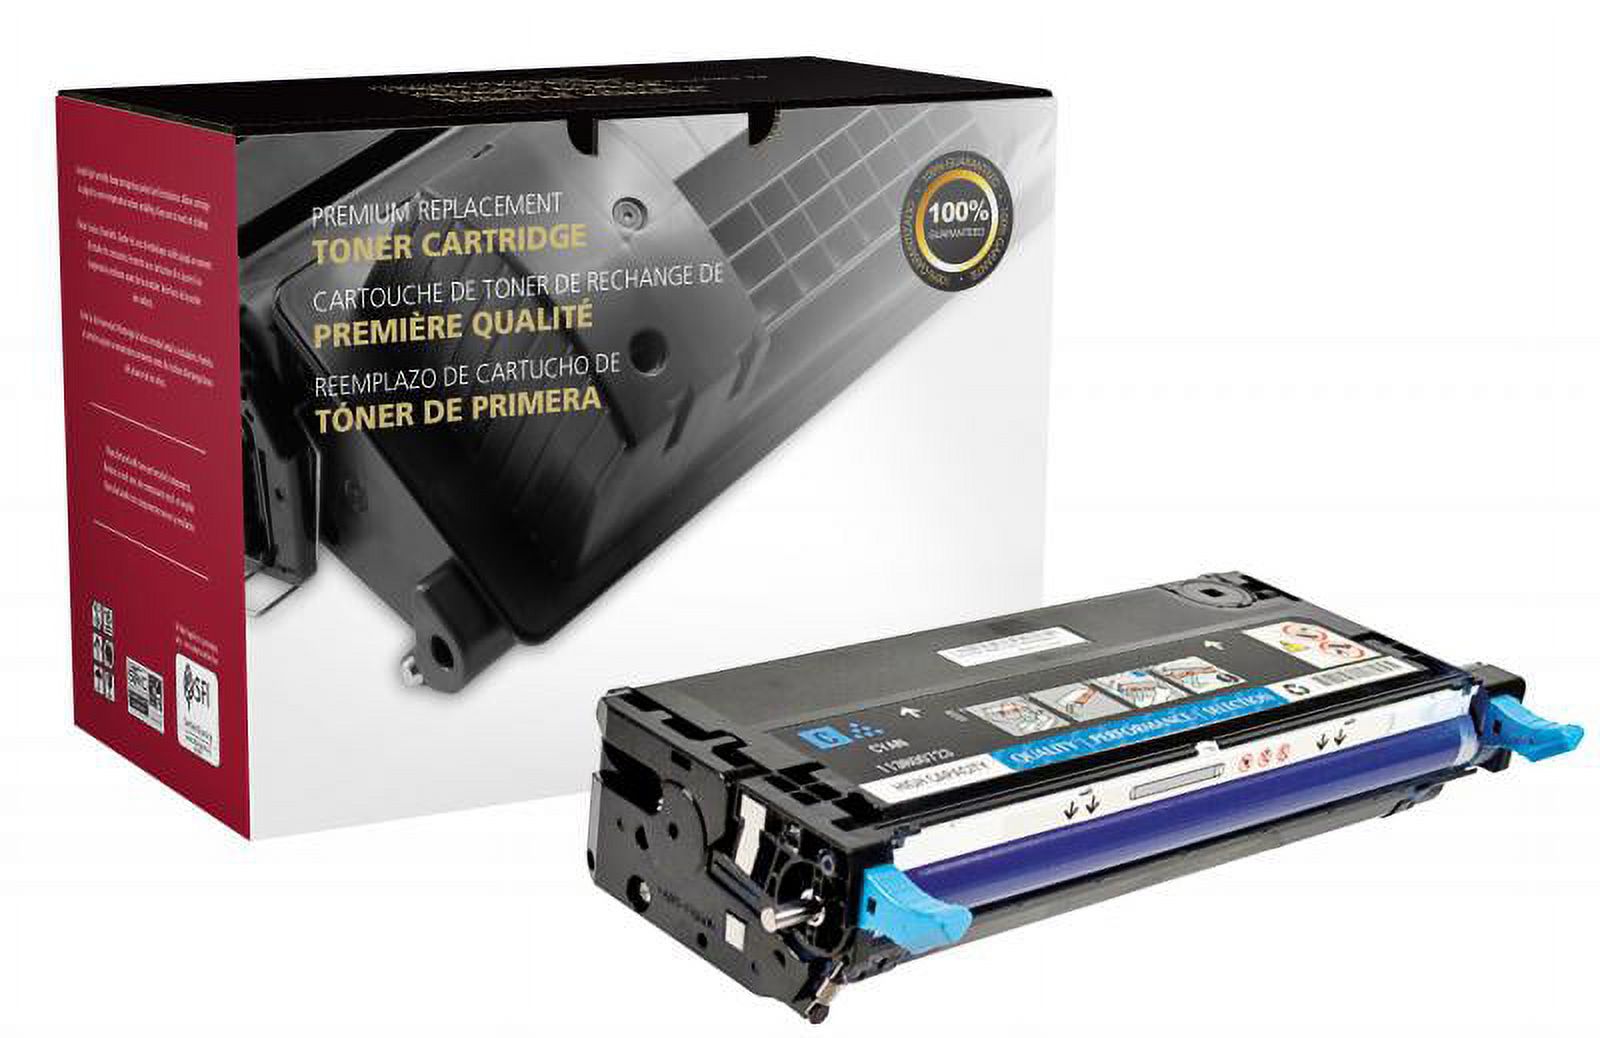 Clover Imaging Remanufactured High Yield Cyan Toner Cartridge for Xerox 106R01392/106R01388 - image 1 of 2